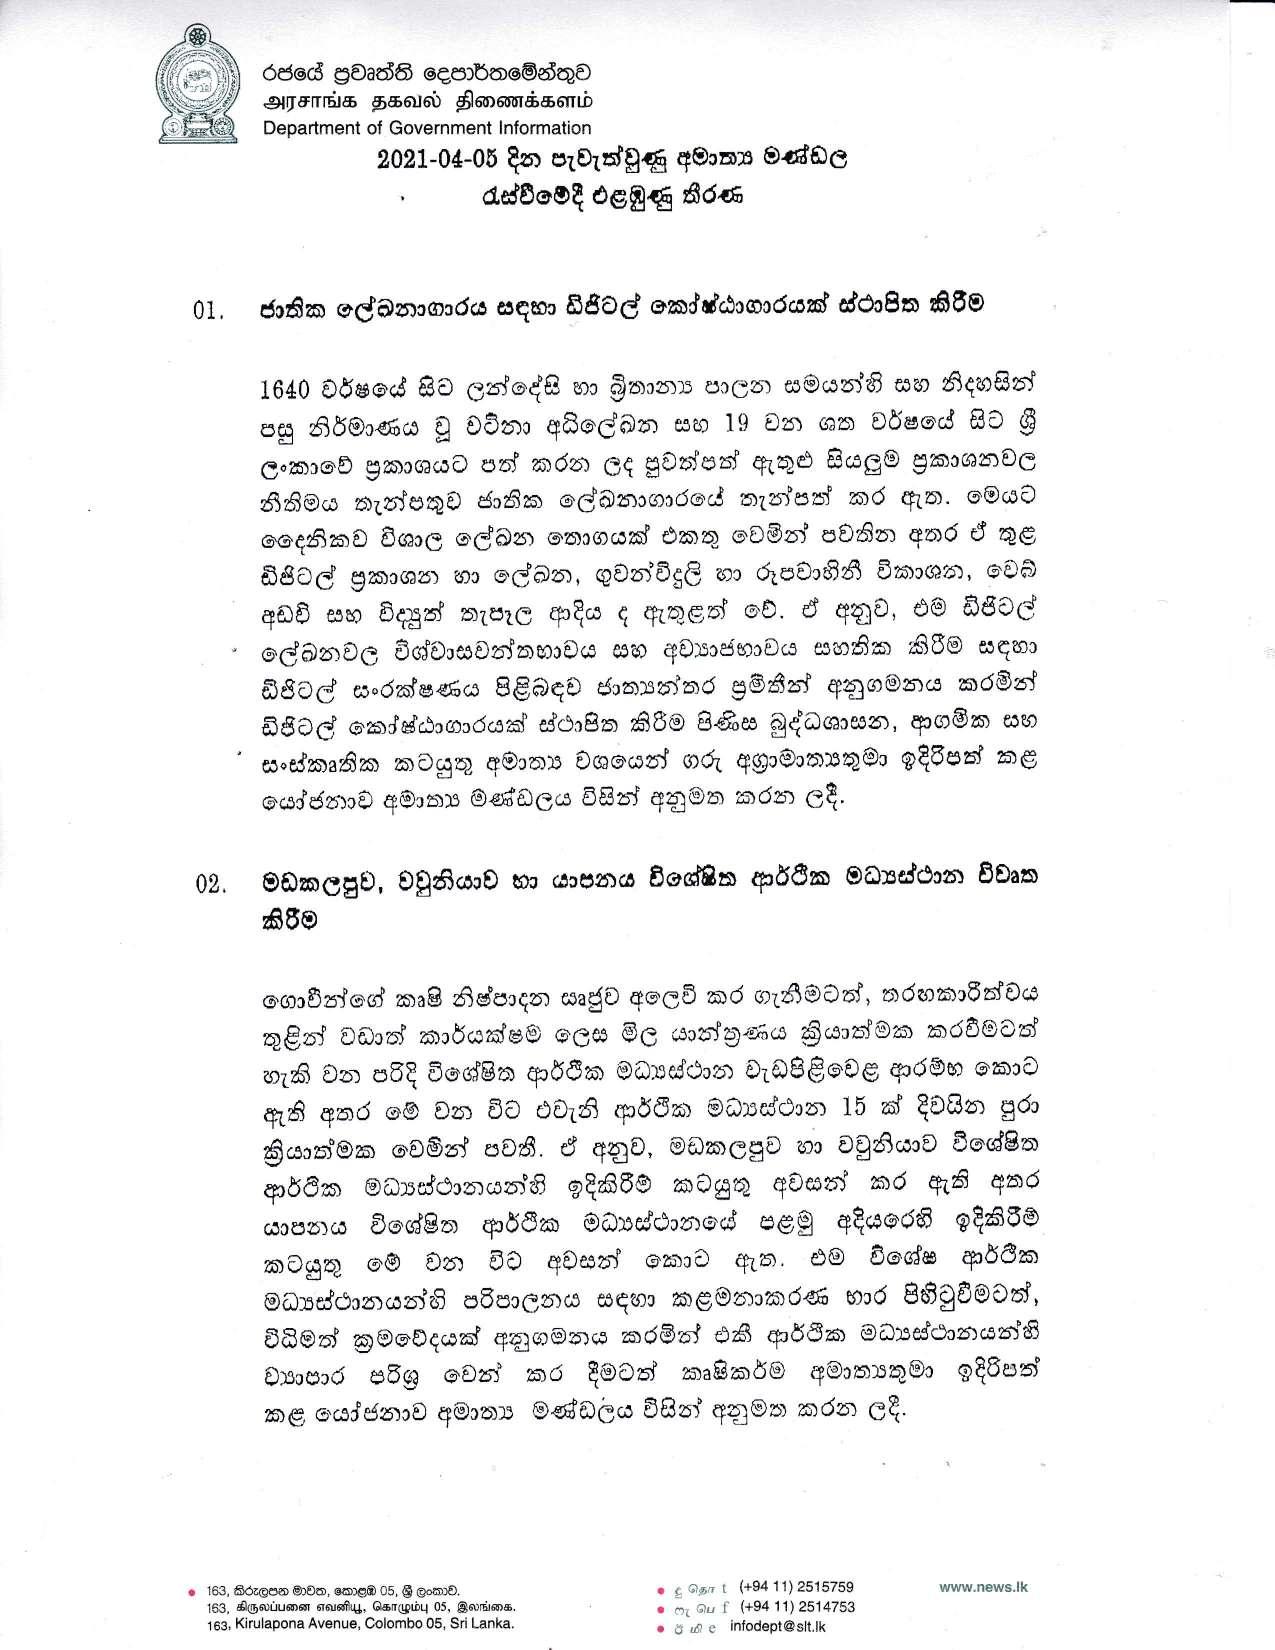 Cabinet Decision on 05.04.2021 Sinhala page 001